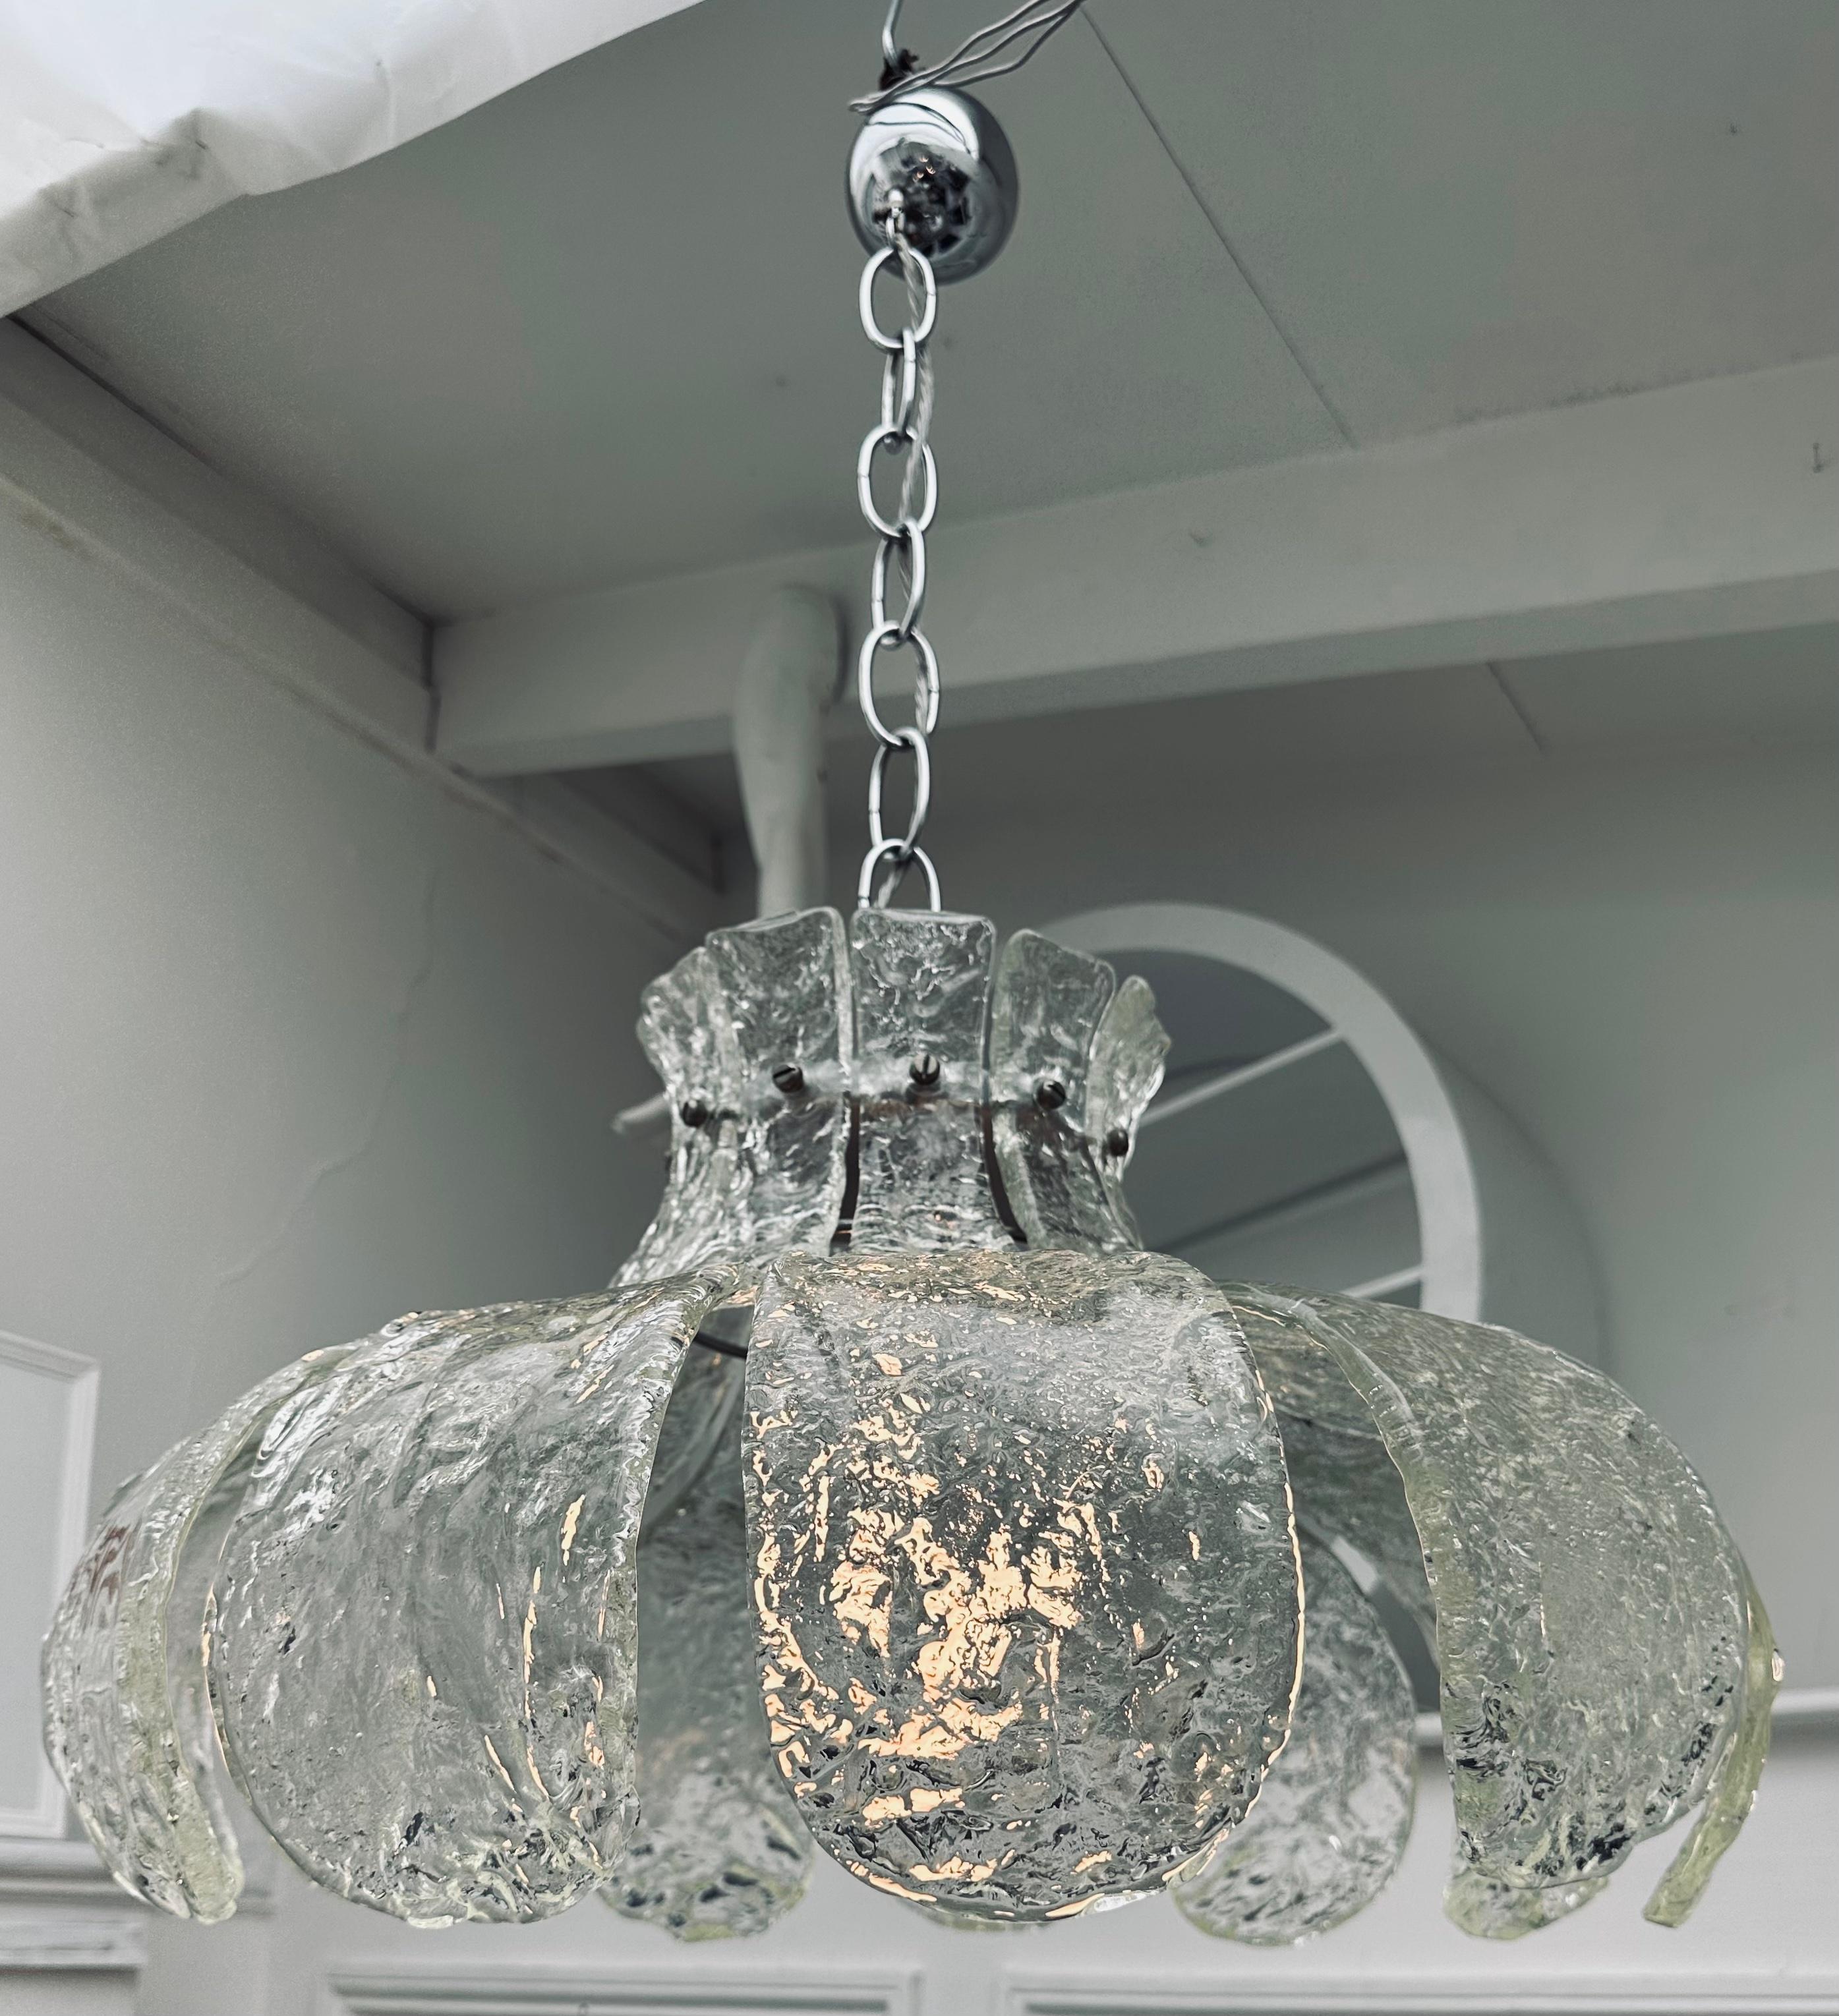 1960s midcentury Italian Murano glass pendant light with 11 individual curved textured thick clear-glass petals which are secured with a small chrome flat-head screw onto a chromed-metal frame to form a large hanging tulip flower. As you can see